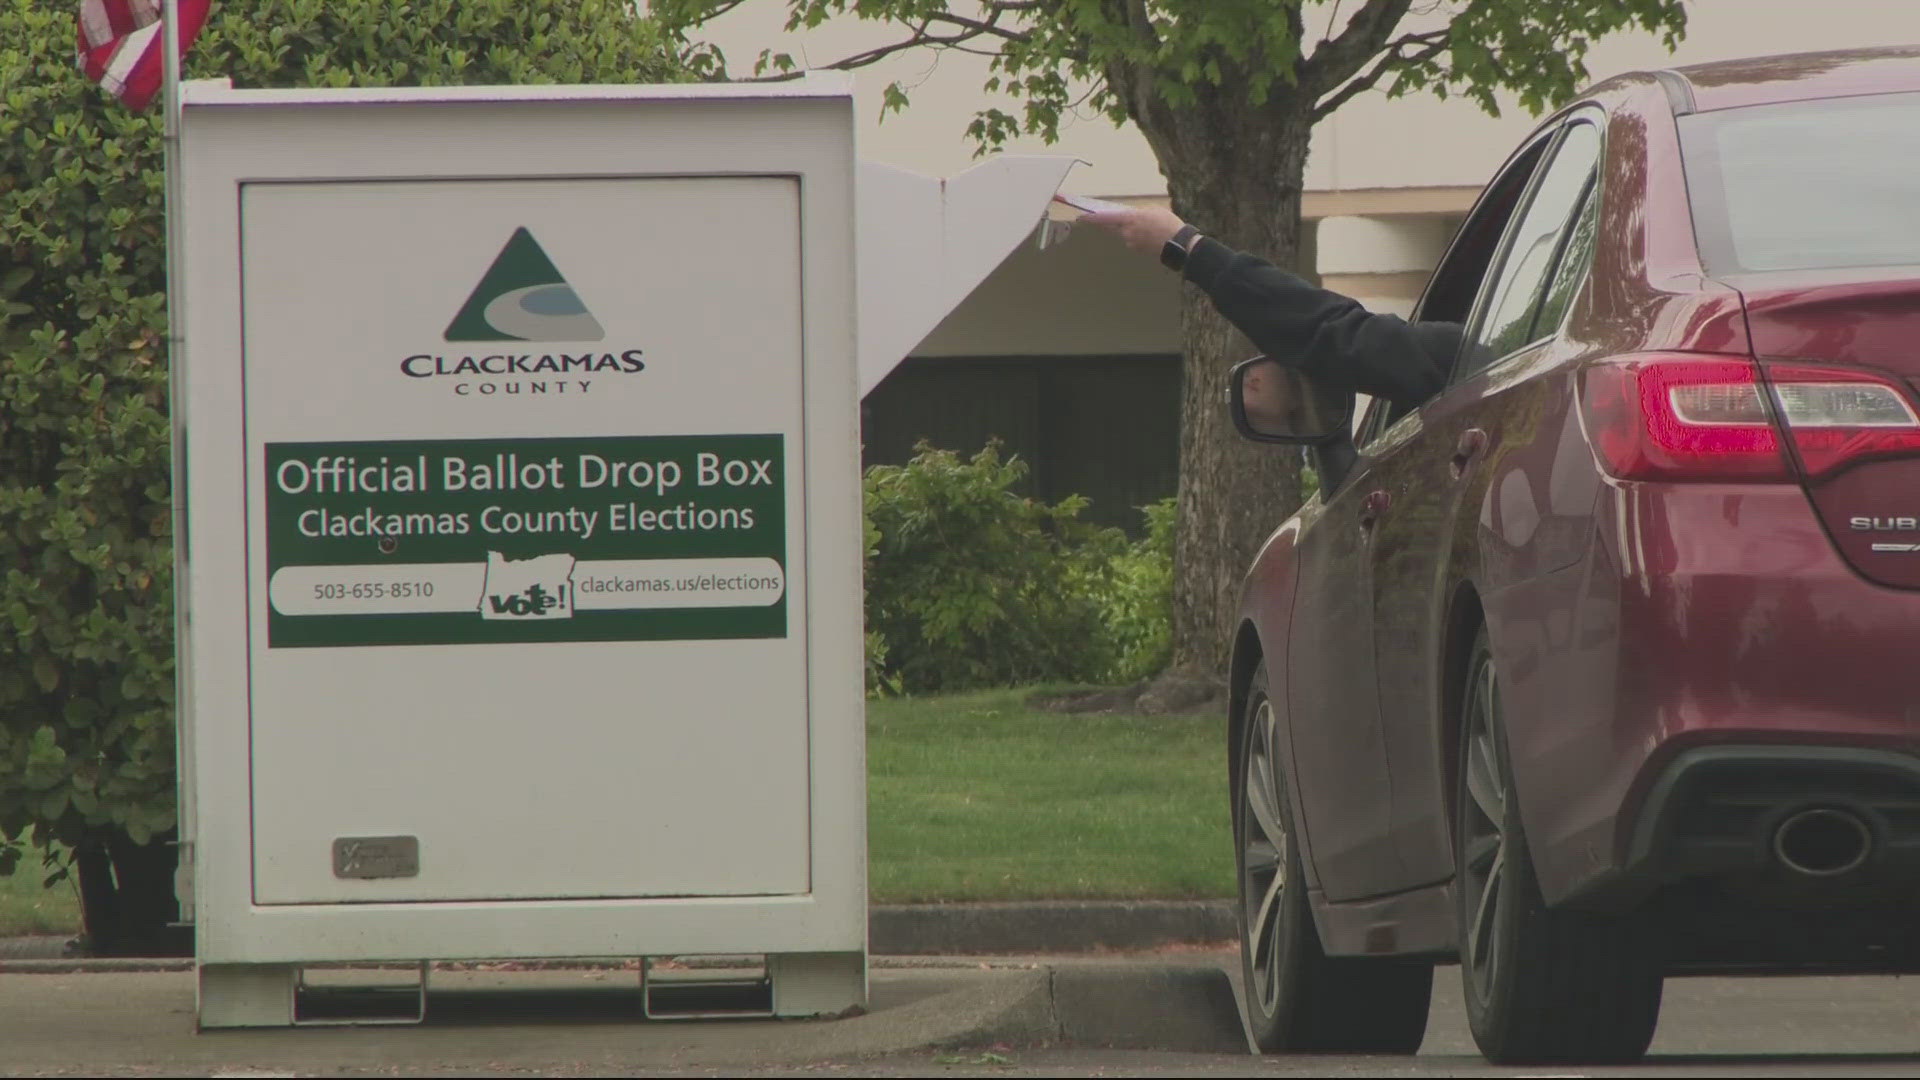 The Clackamas County Elections Office held special Saturday hours, where voters were able to get replacement ballots and have any questions answered.